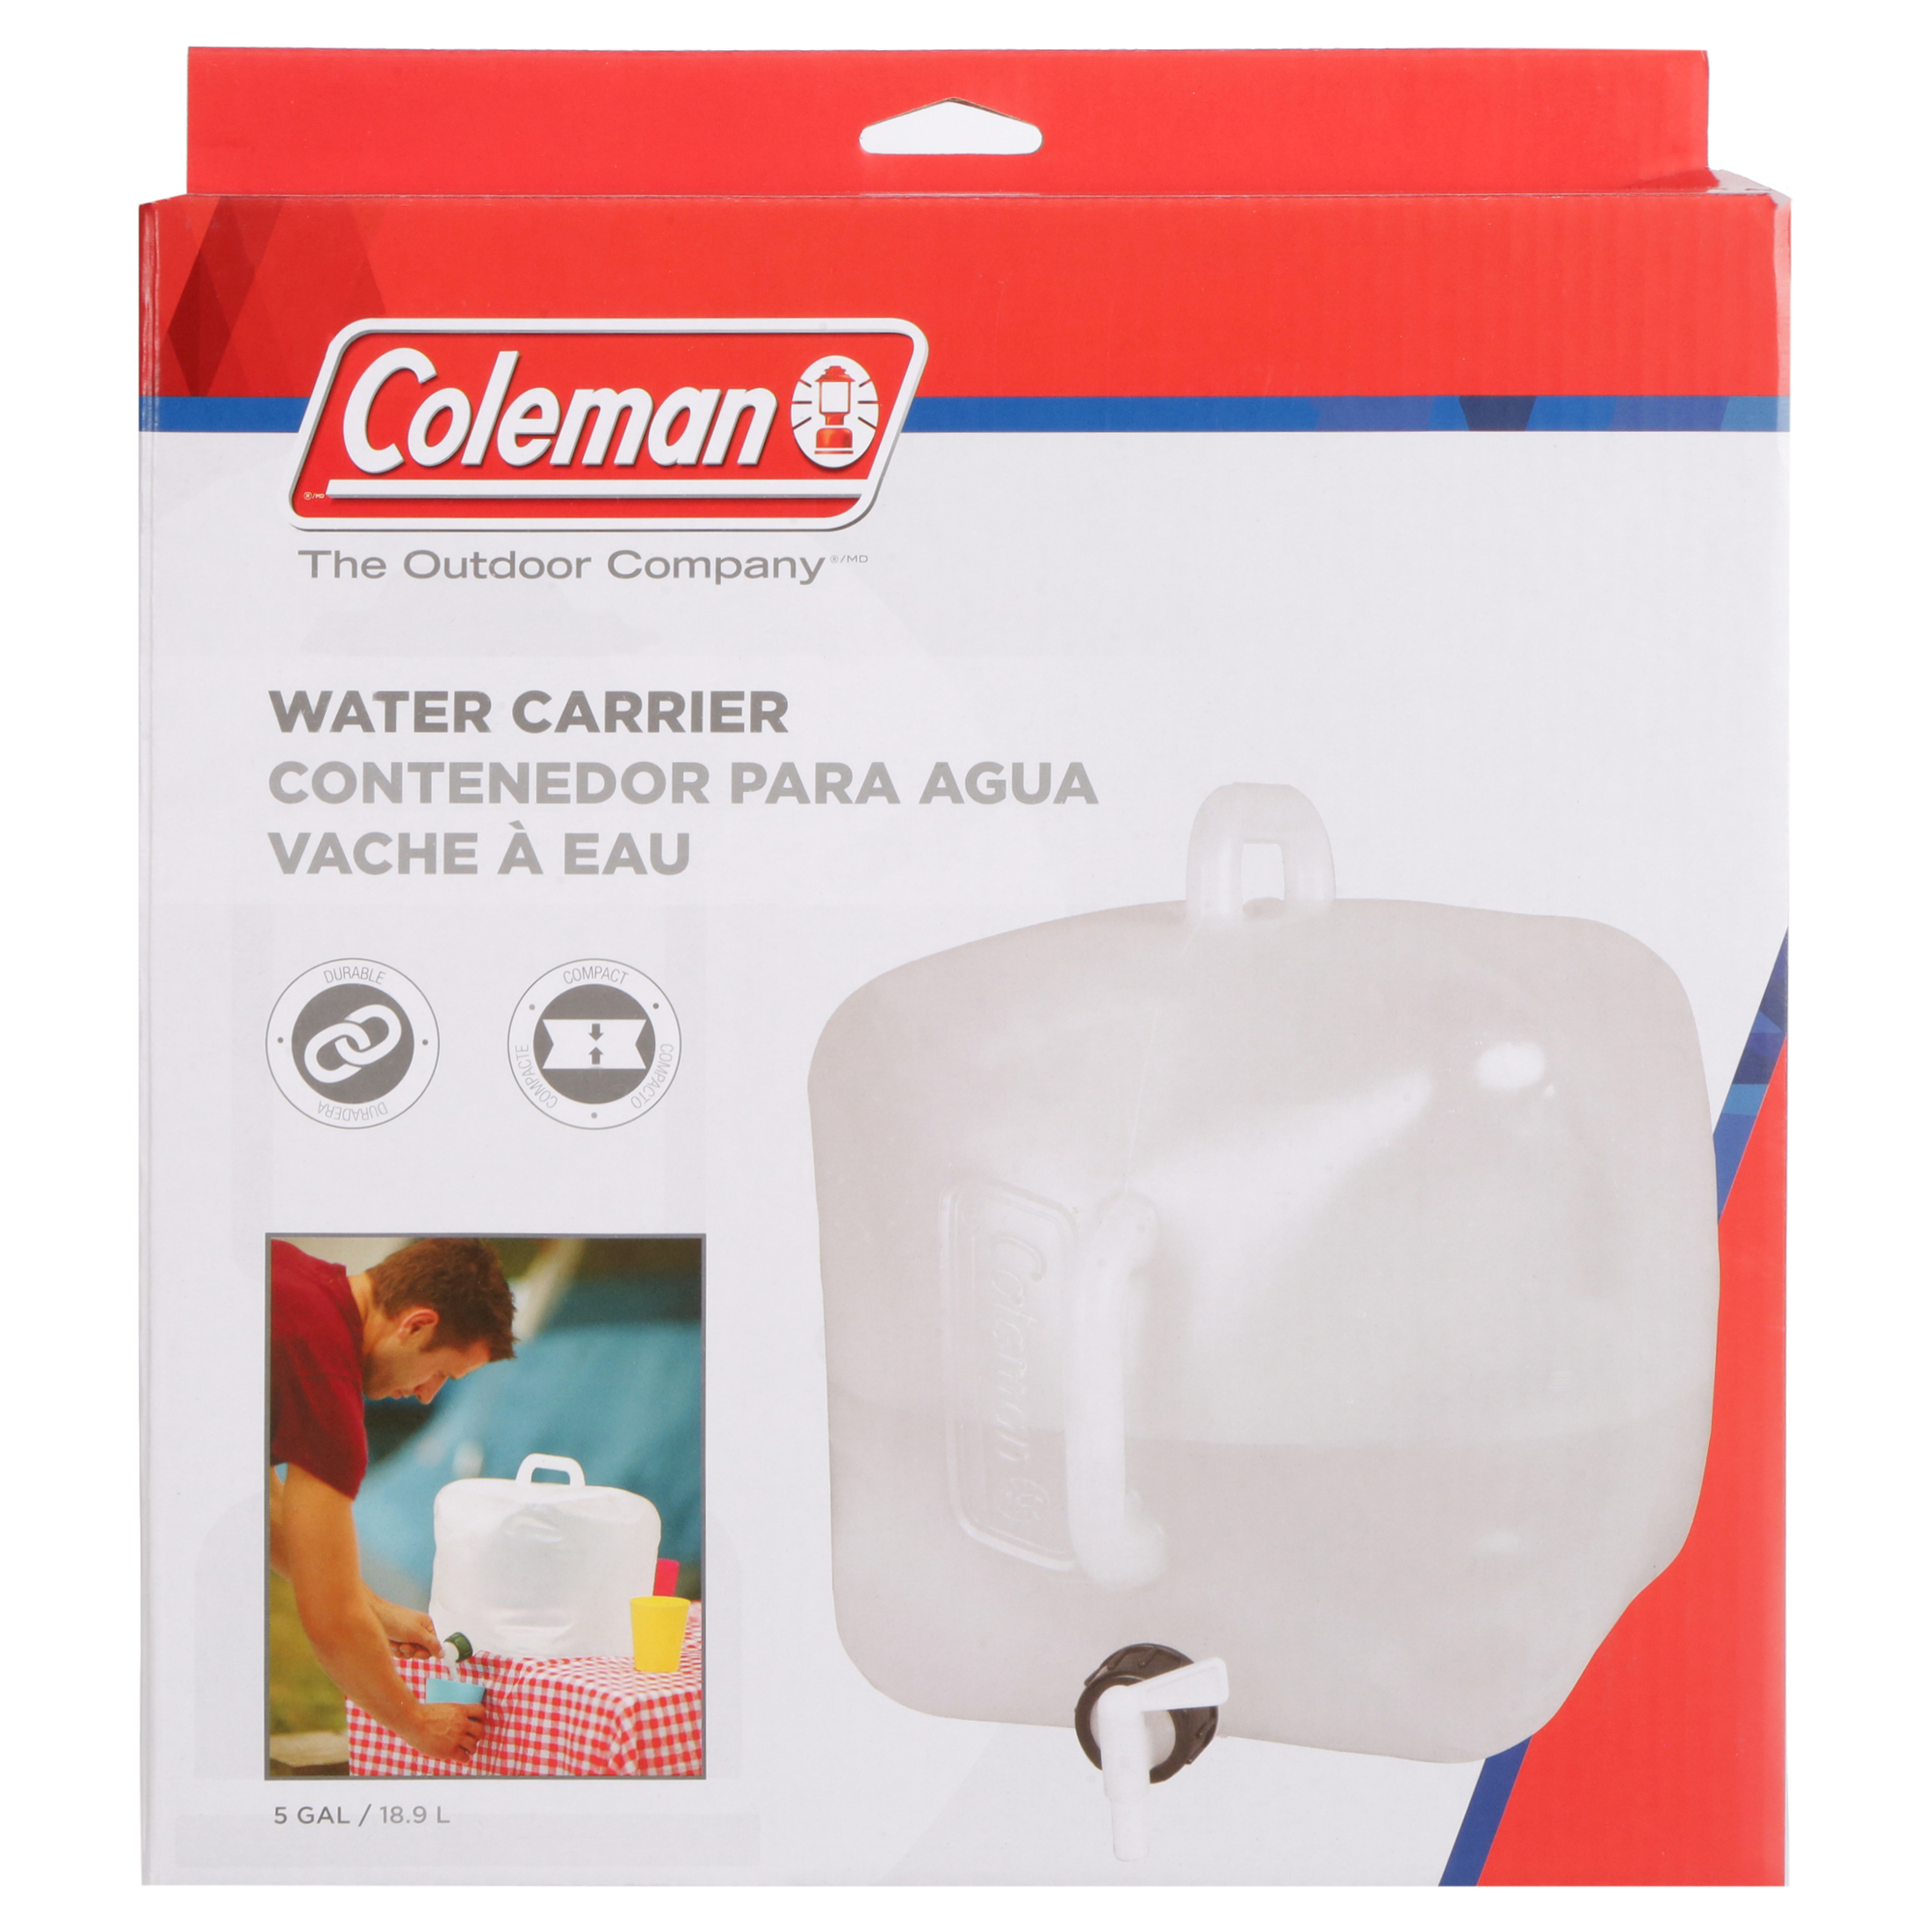 Coleman 5 Gallon Easy Carry Portable Water Carrier with Removable Spigot, Clear - image 6 of 10